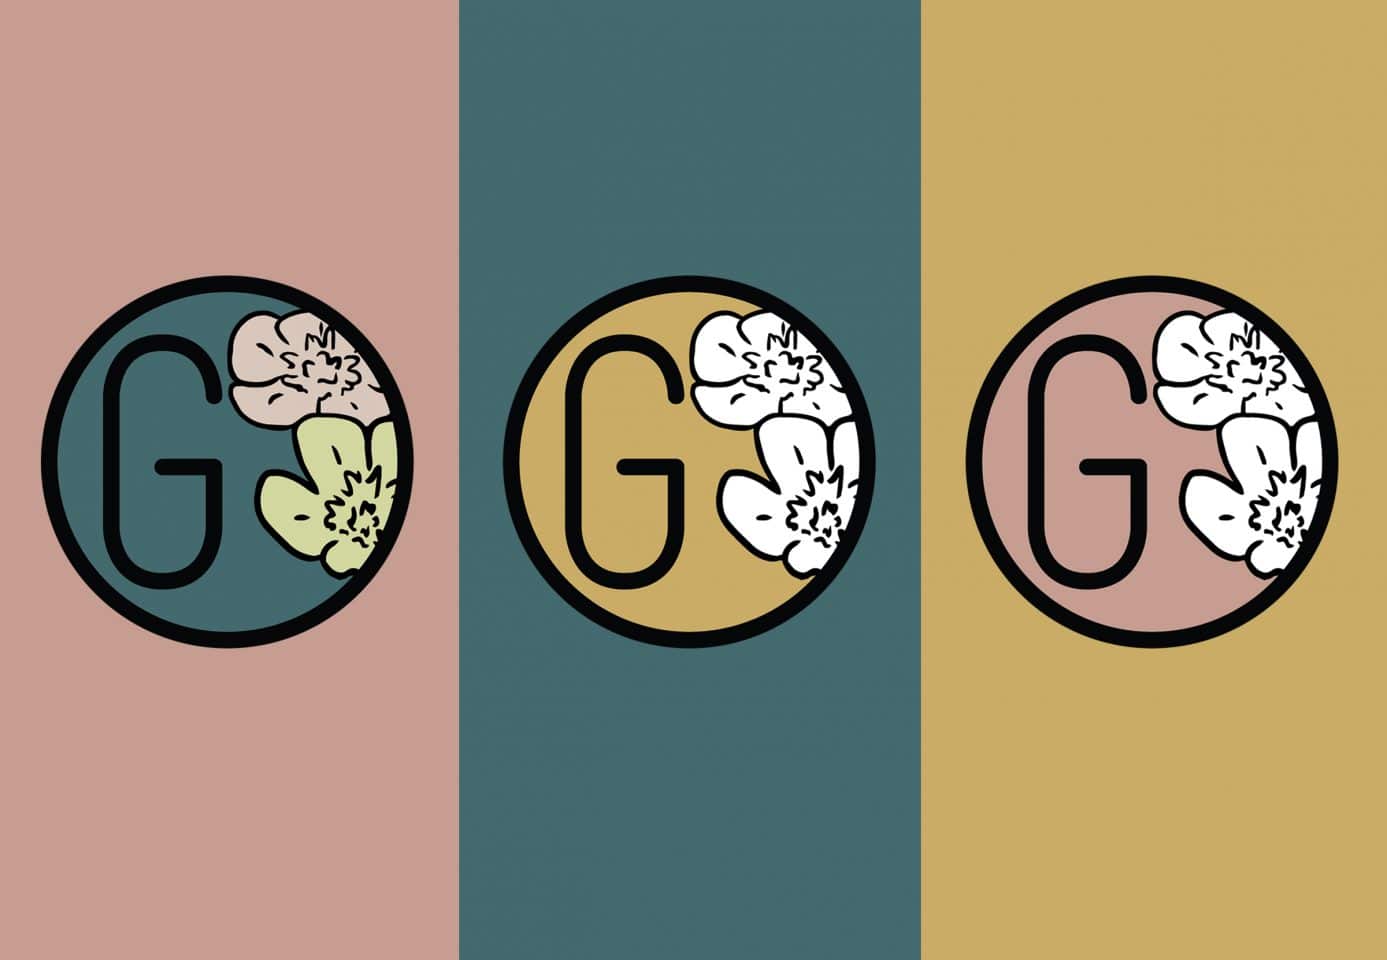 There are 3 social media icons. This is to represent Guilder overall and then each of the two location.